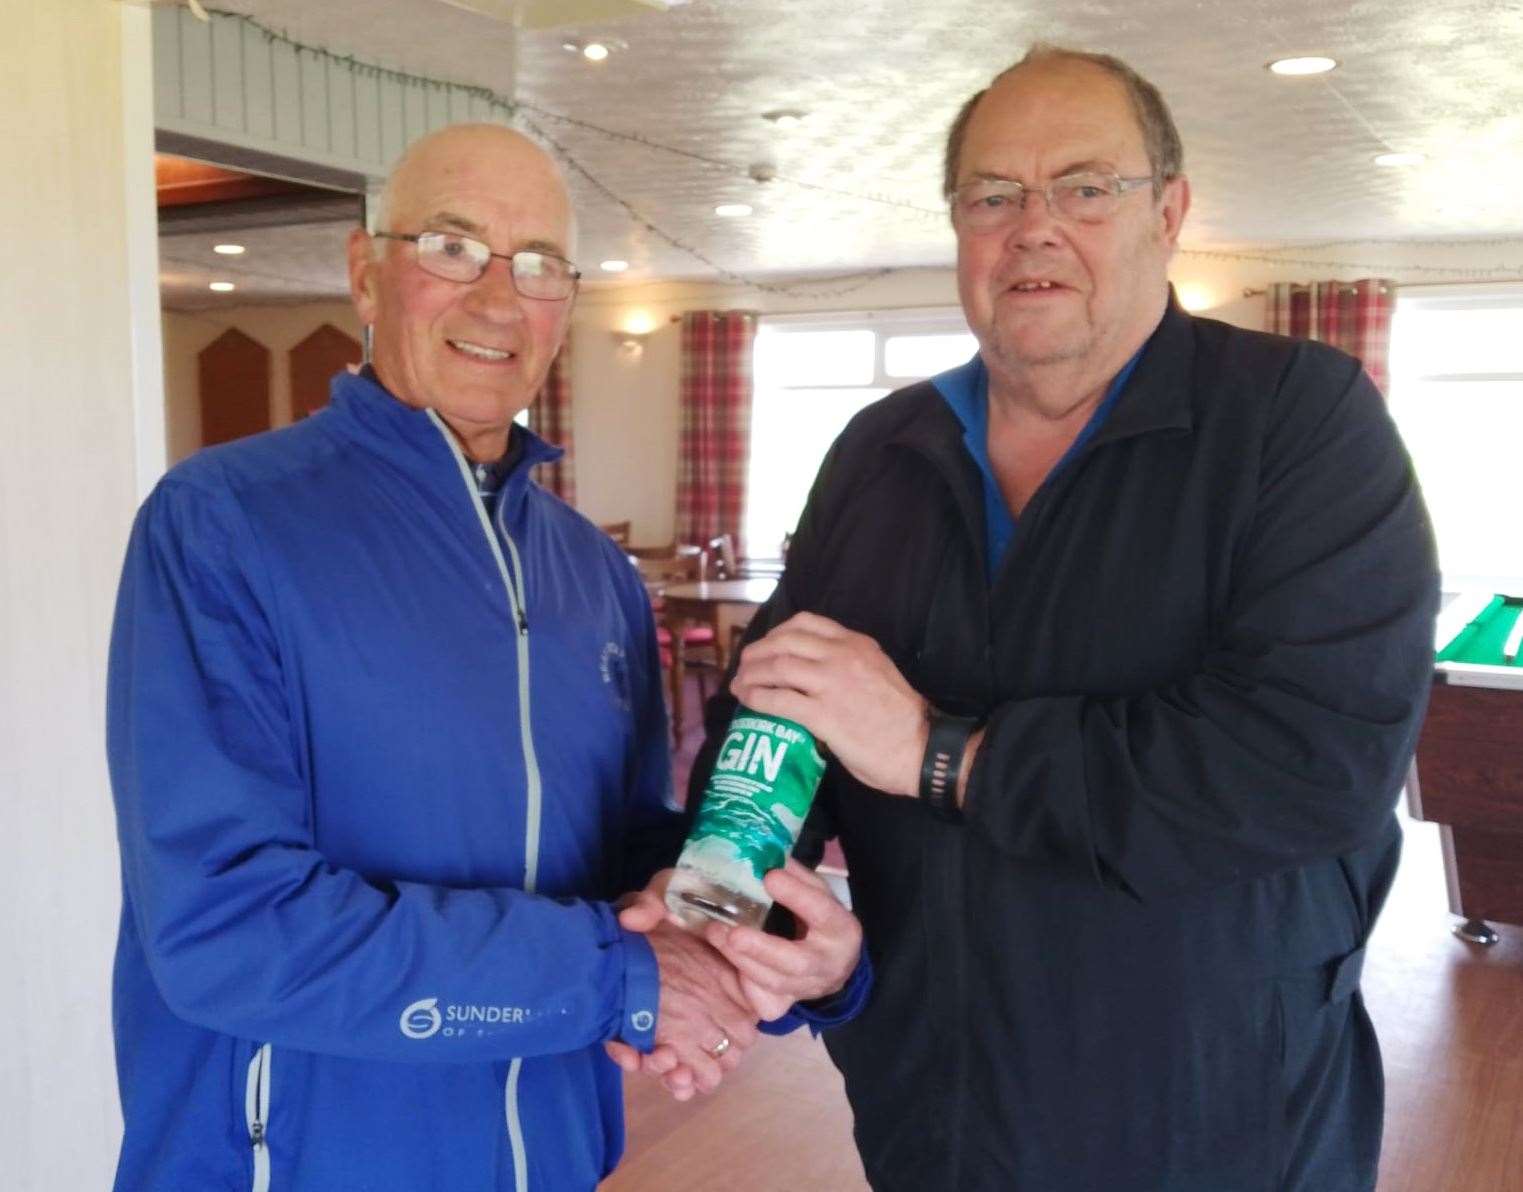 Alistair Gunn (left) receiving the nearest-the-pin prize, a bottle from North Point Distillery, from Mike Halliday after winning it in the Senior Stableford competition.